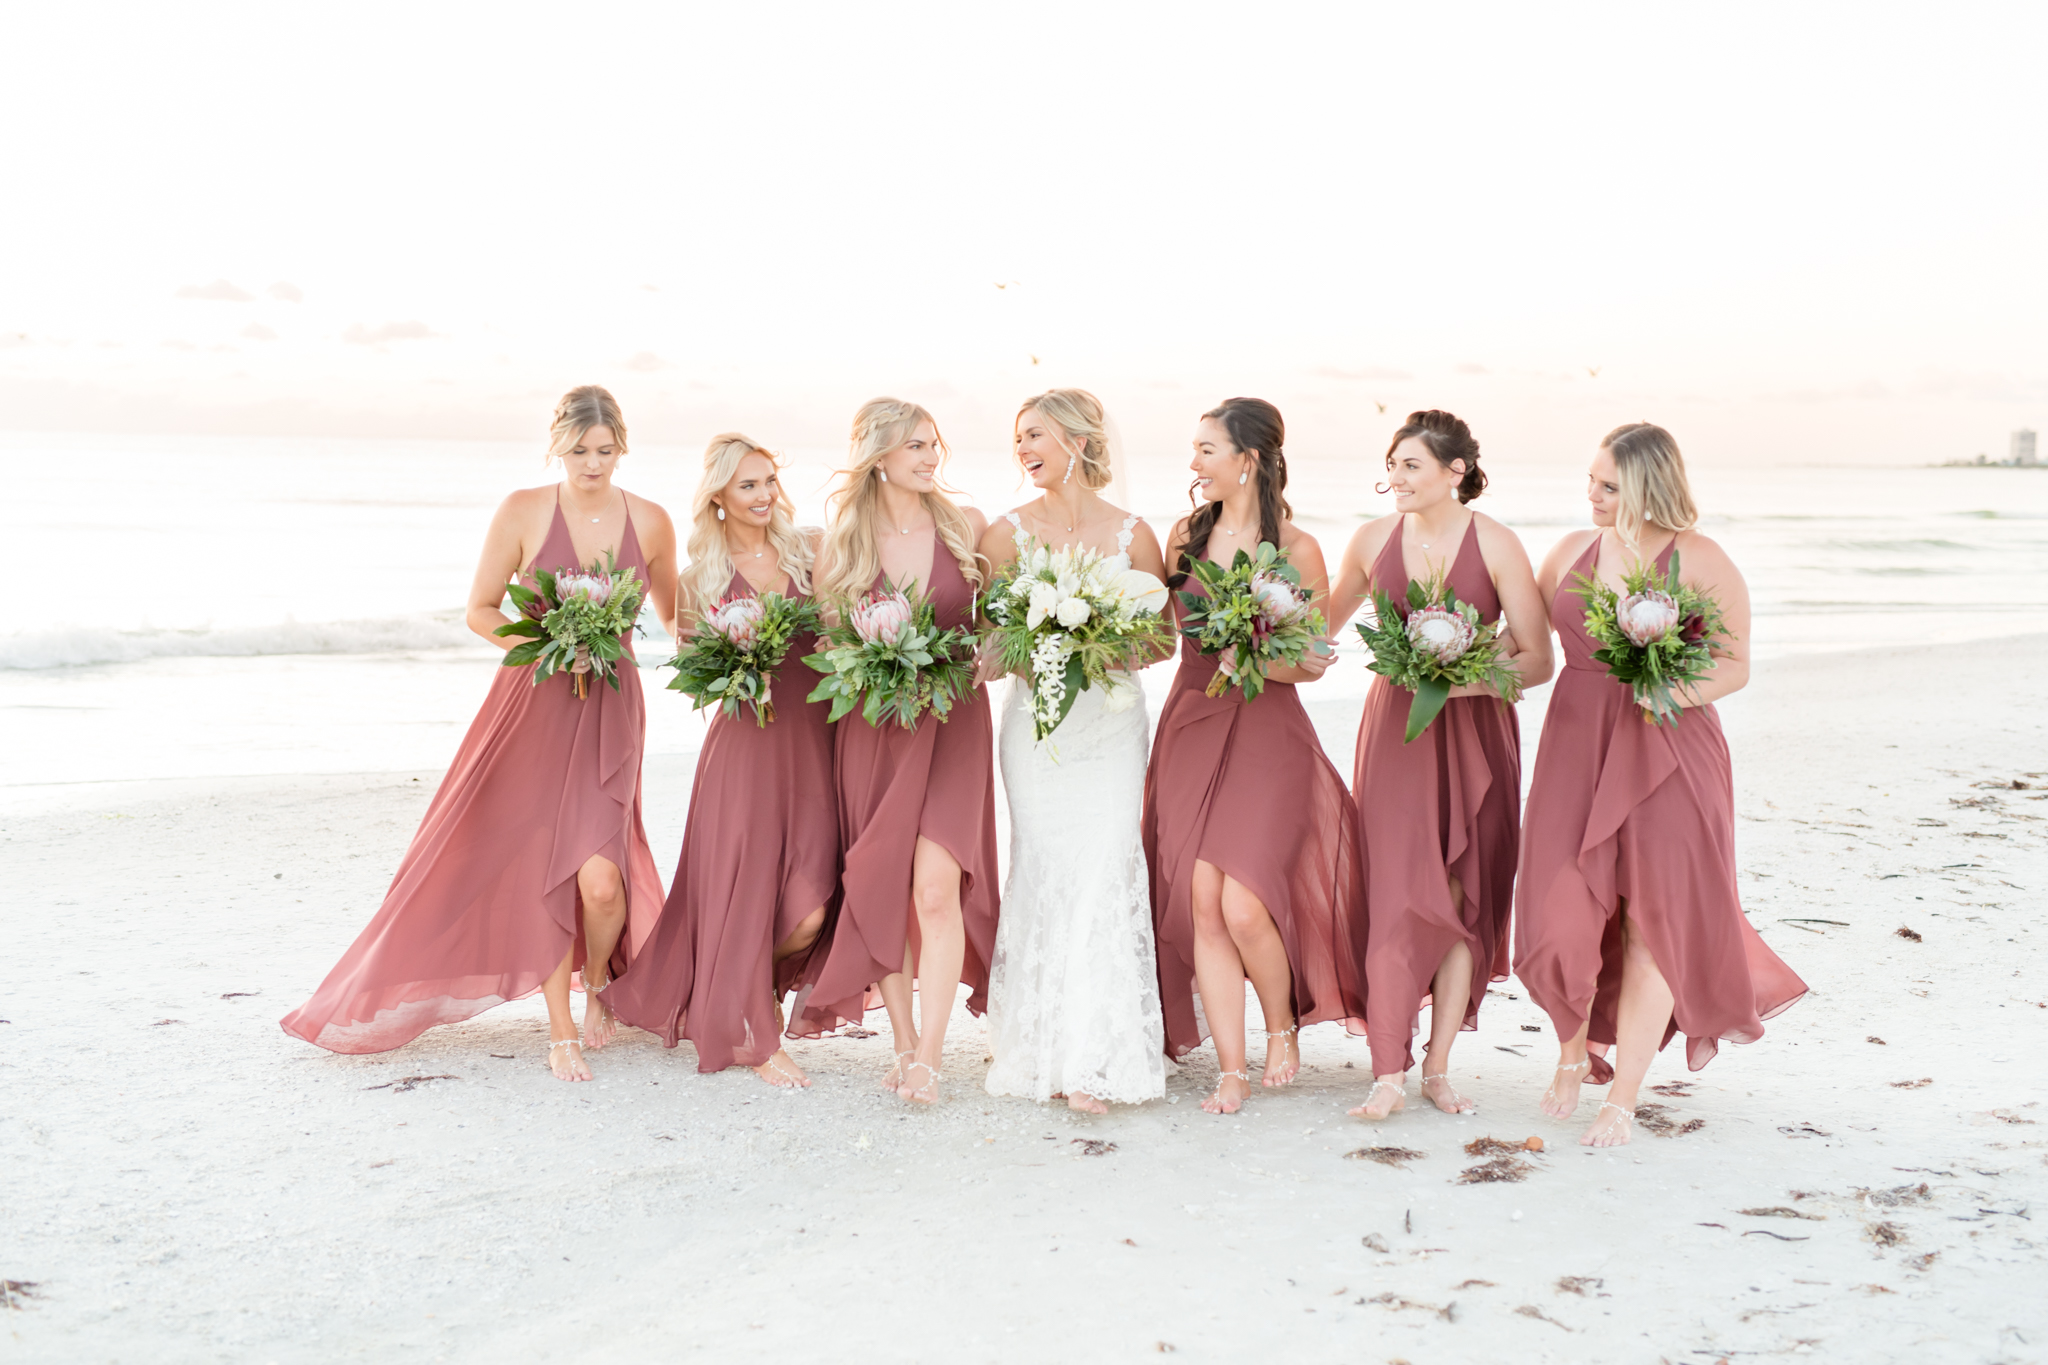 Bride and bridesmaids walk together on sunset beach.